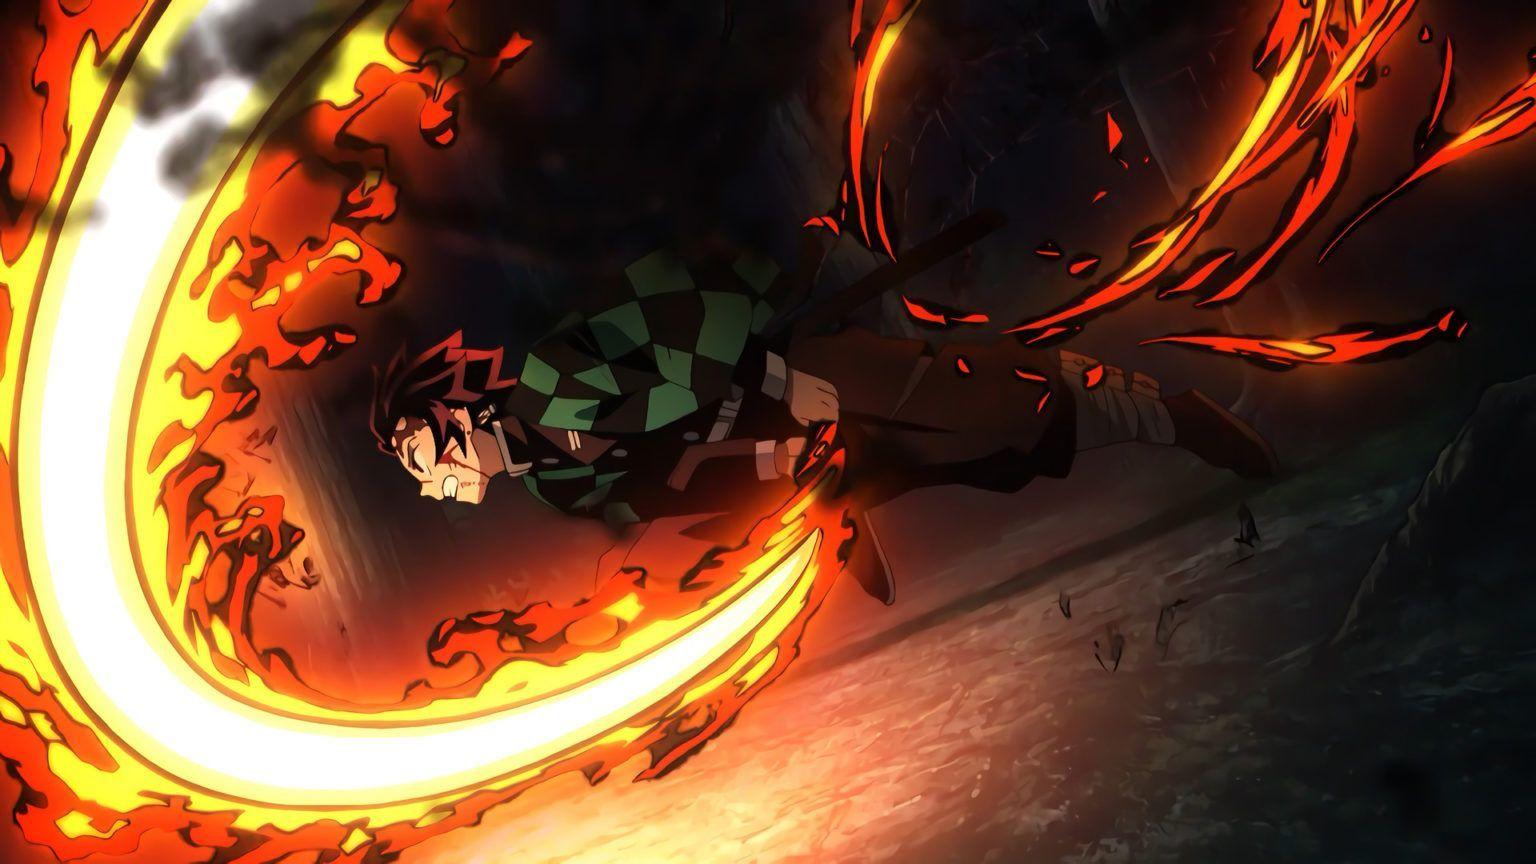 rokka no yuusha  What is the weapon Adlet uses to spit fire called  Anime   Manga Stack Exchange